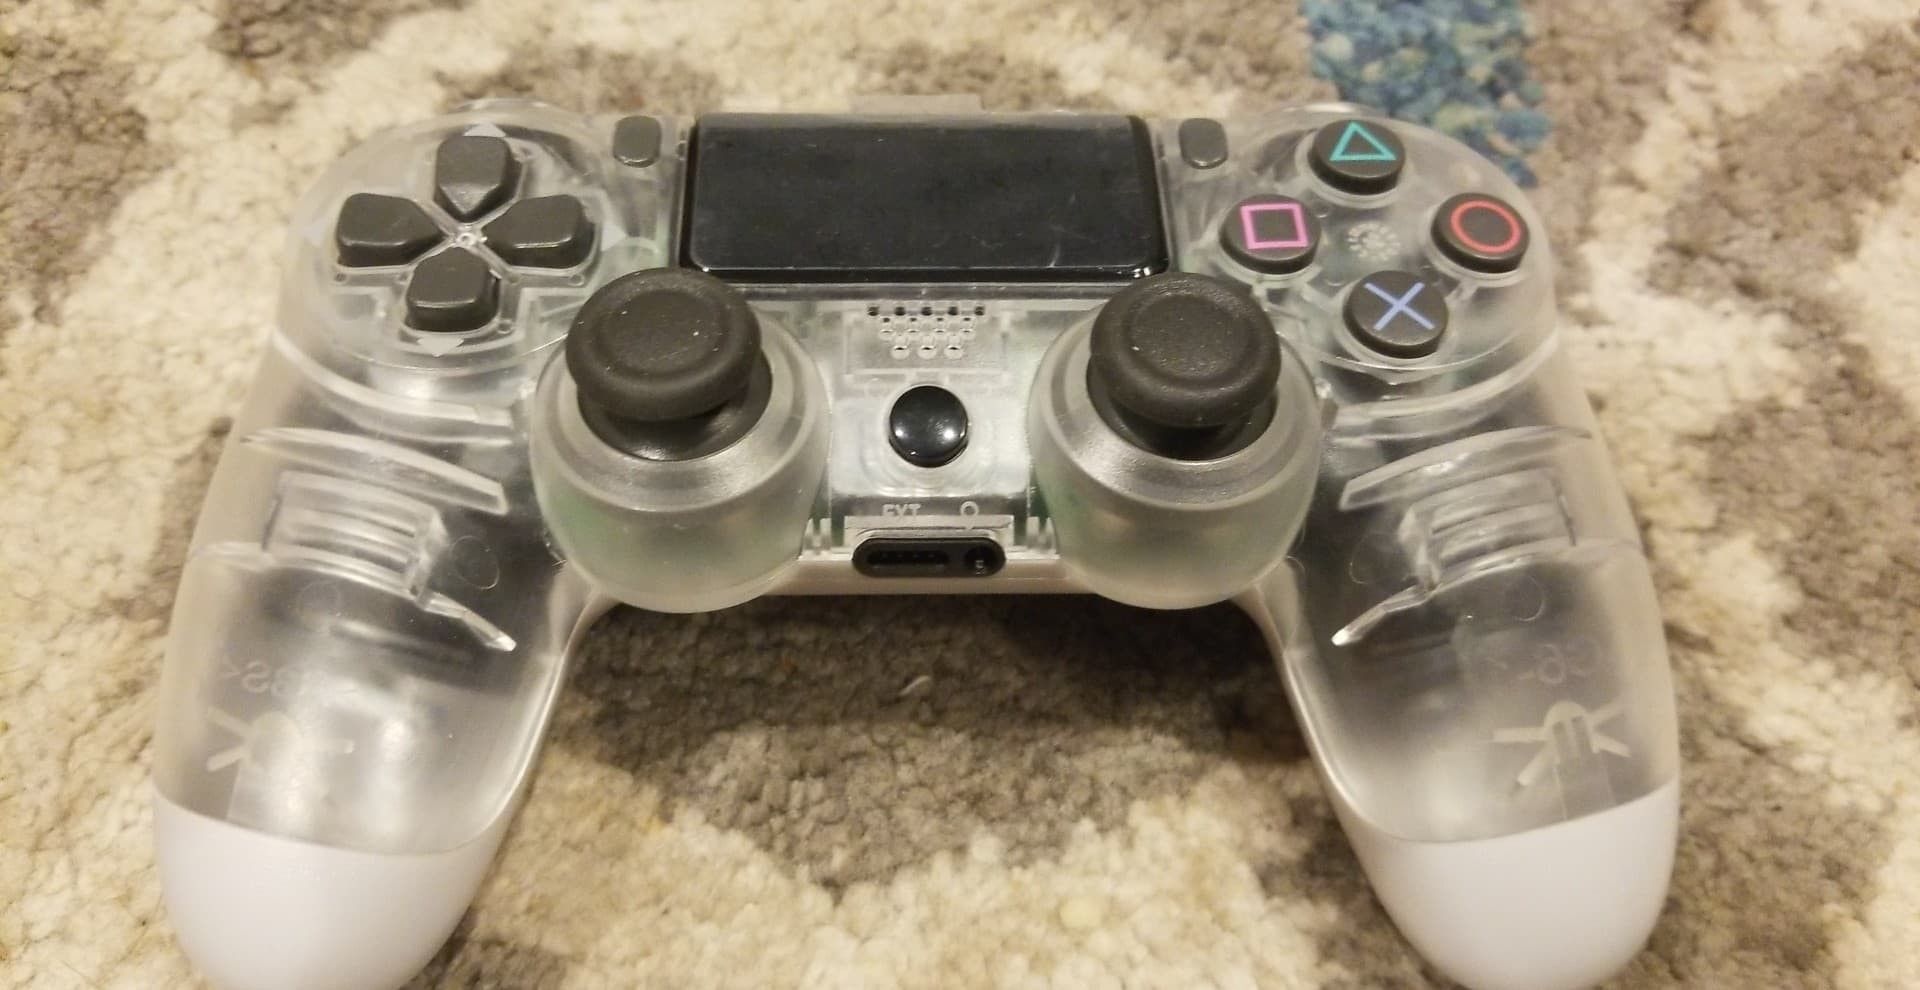 Ps4 Controller BRAND NEW